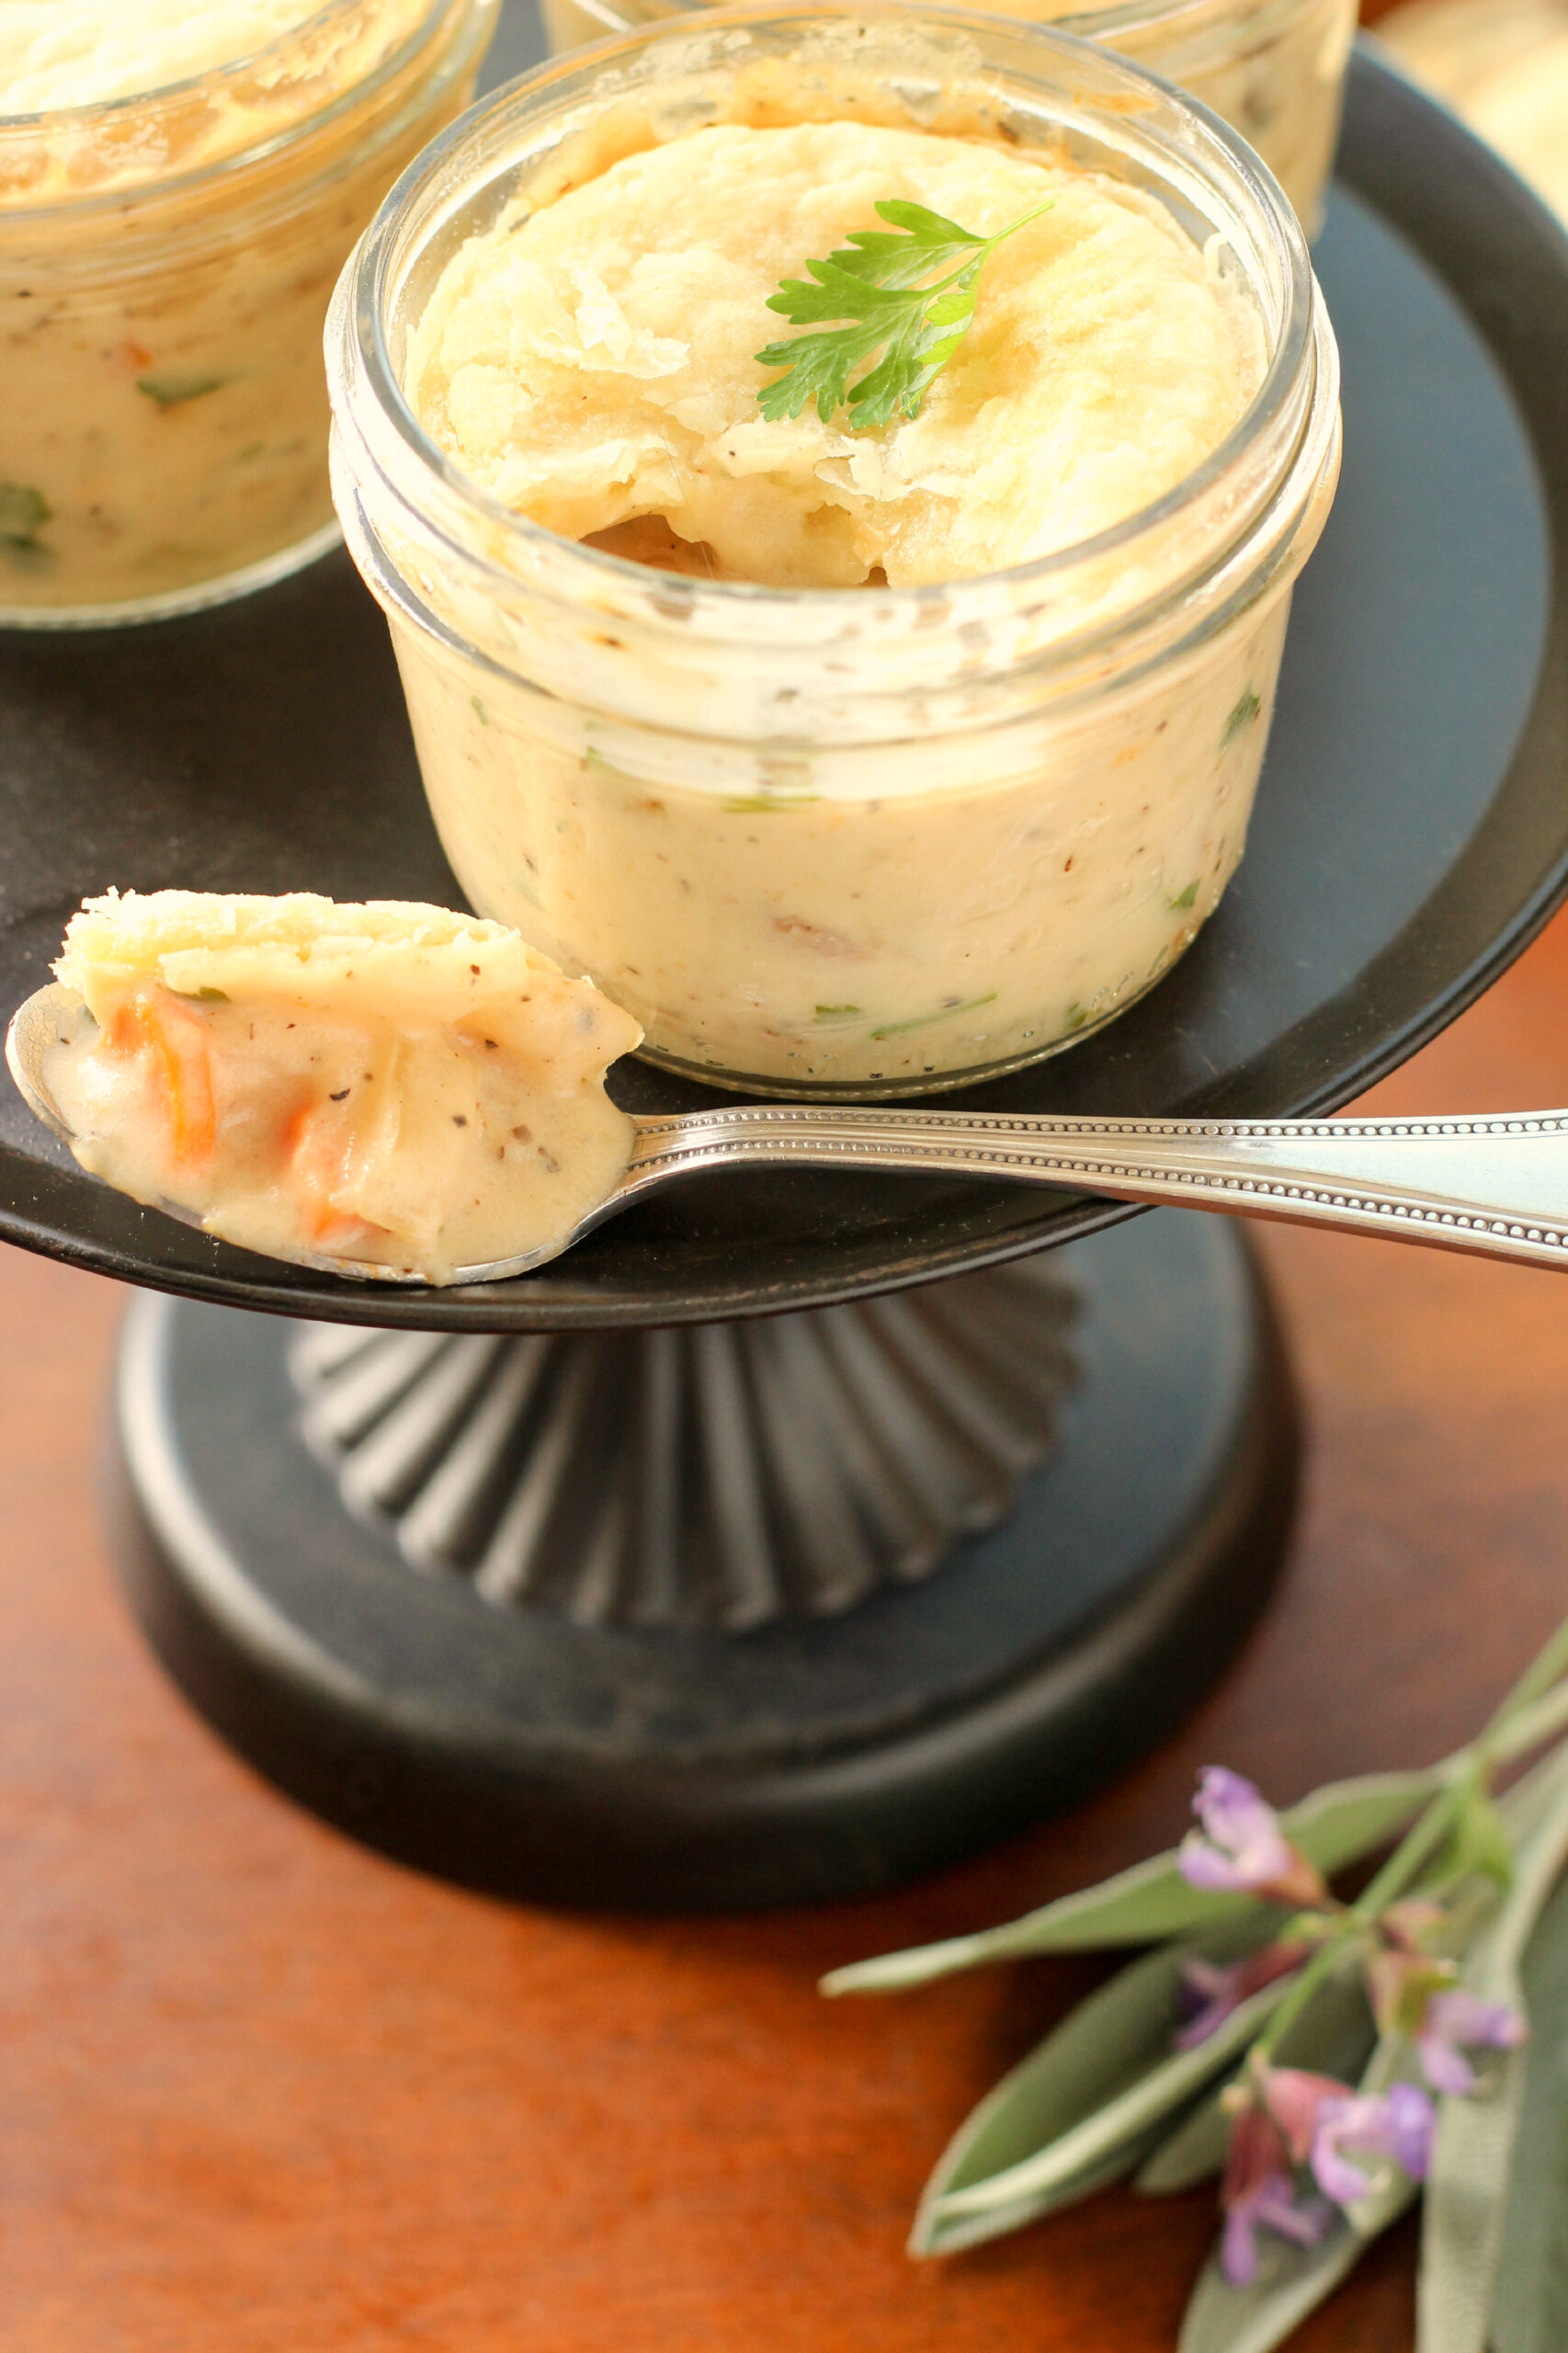 This homemade chicken pot pie is rich and creamy and oh so comfortaing!